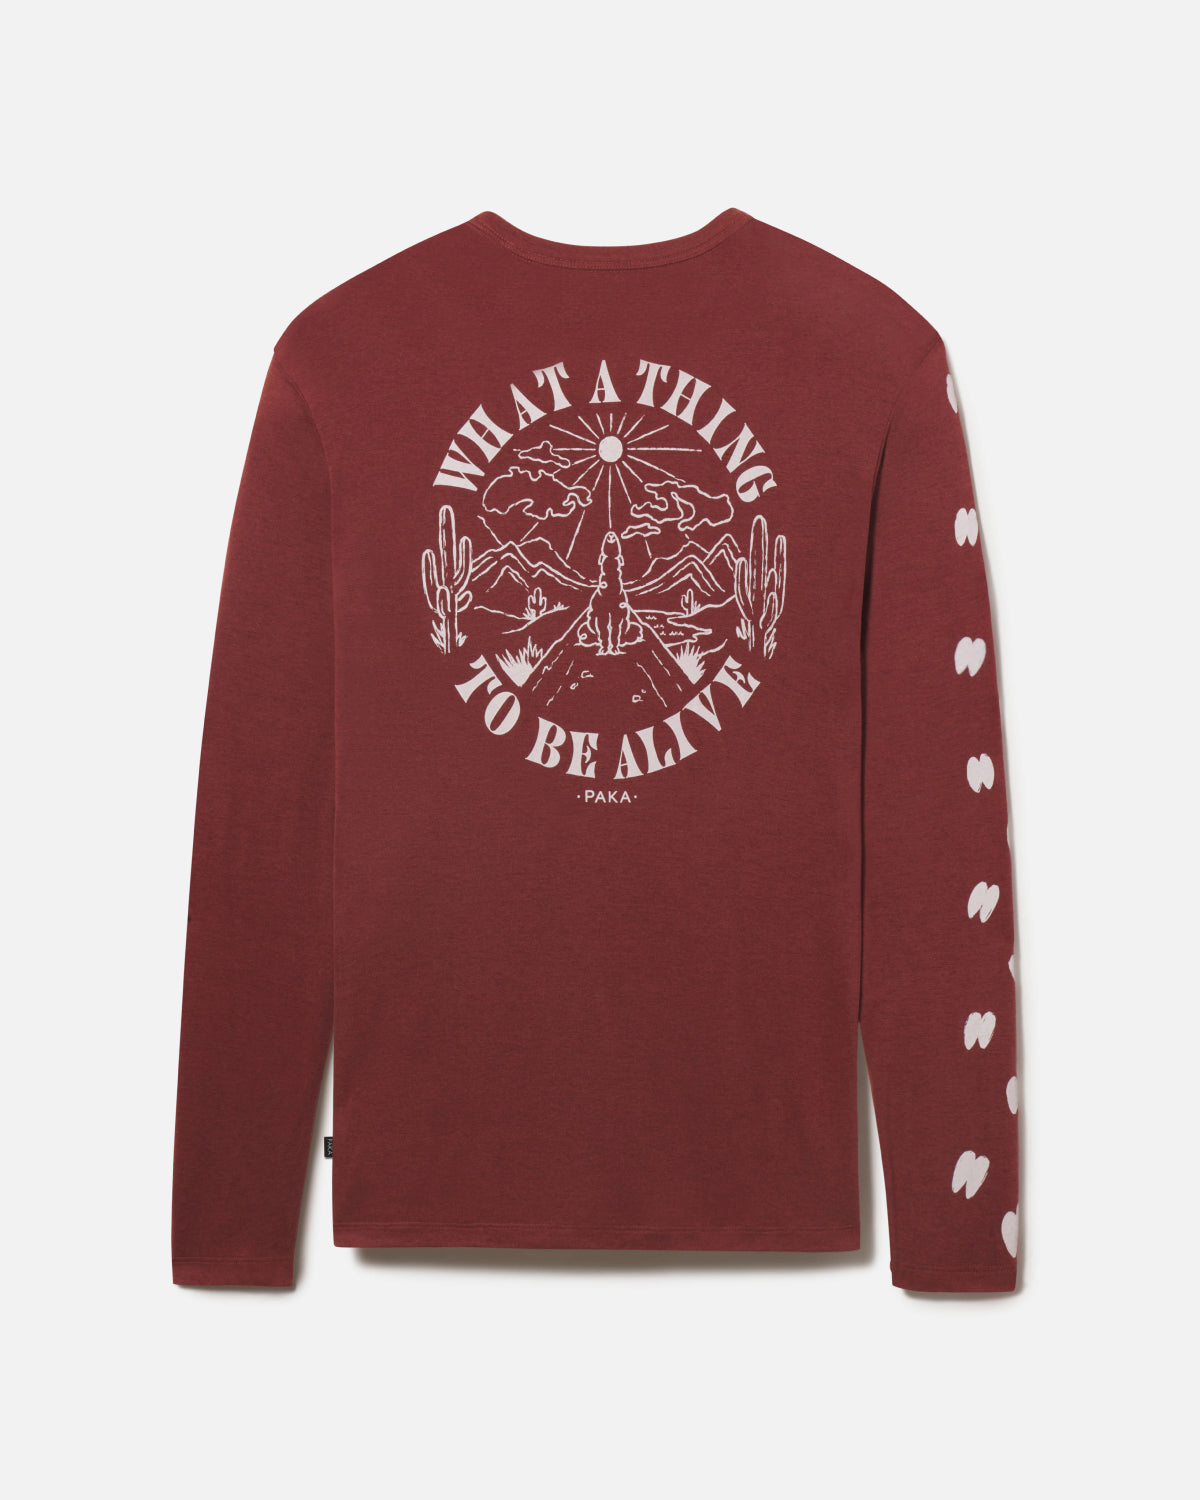 Red alpaca base layer back shot with image of alpaca and text that says "what a thing to be alive"